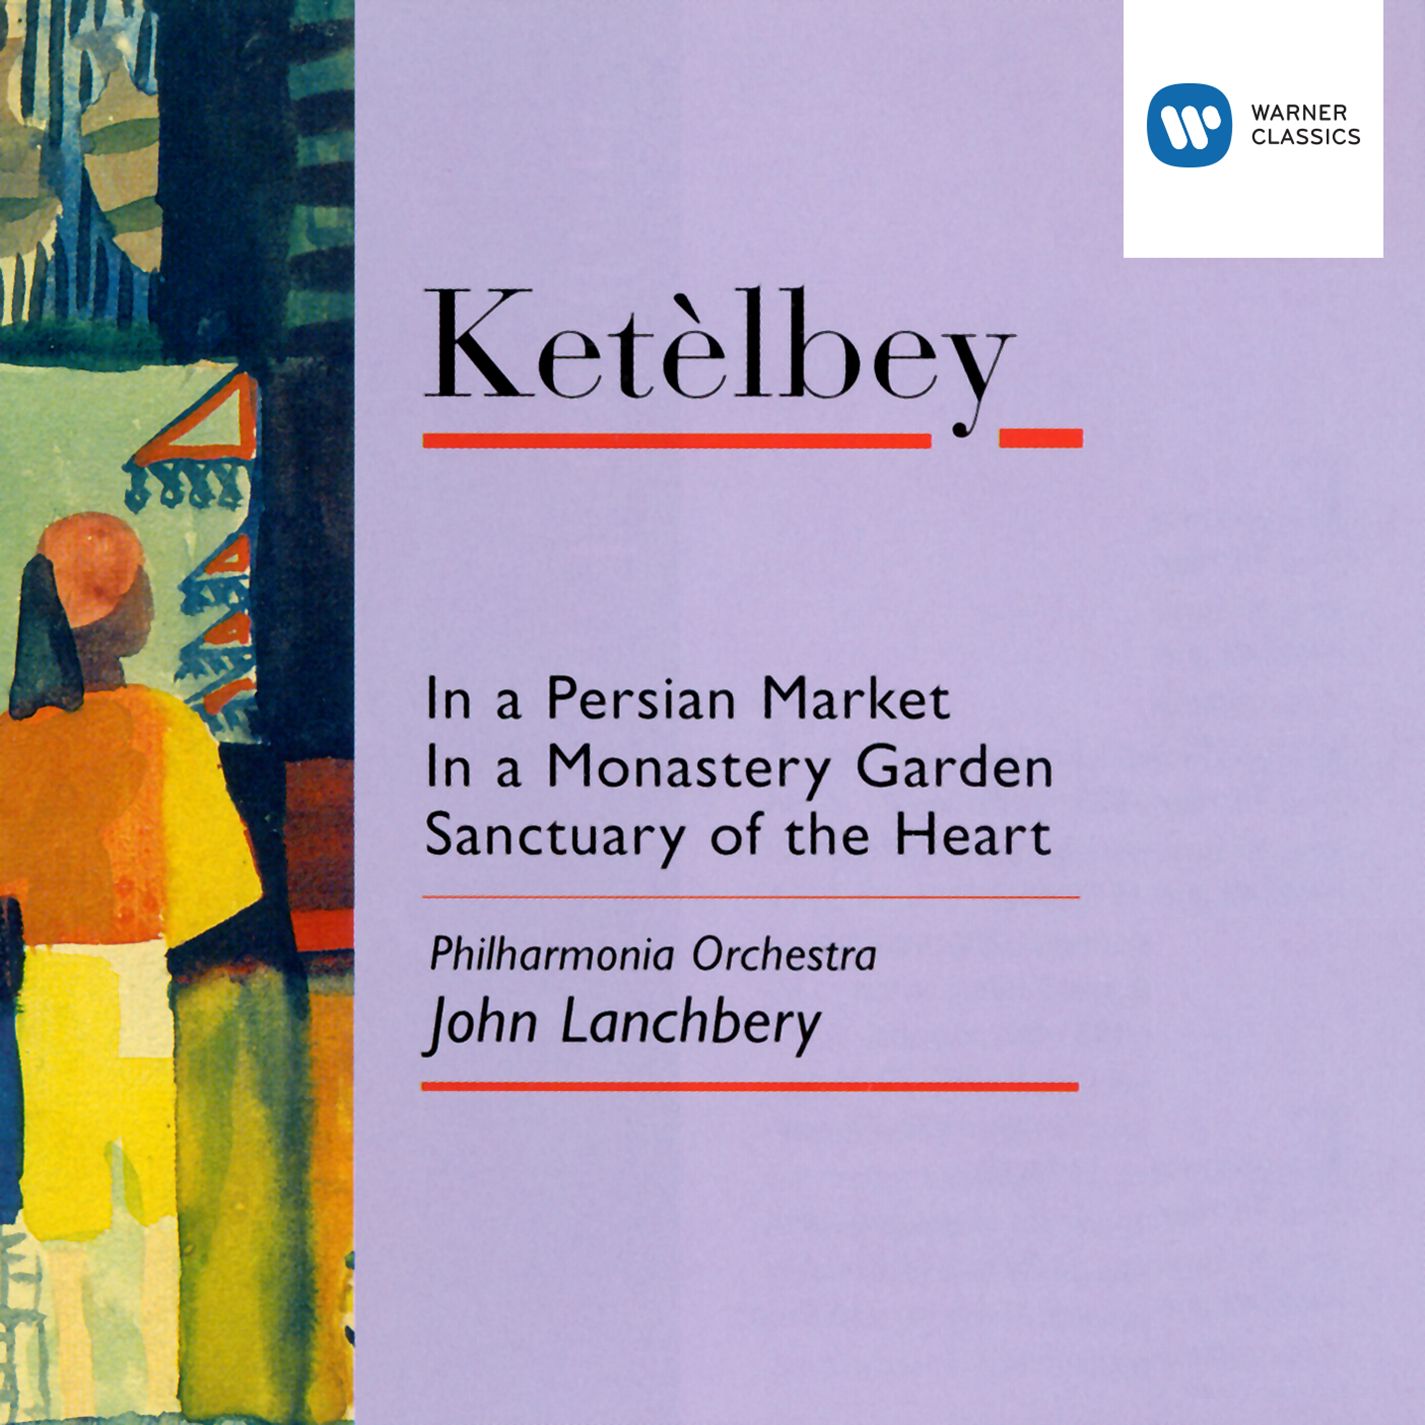 Kete lbey: In a Persian Market